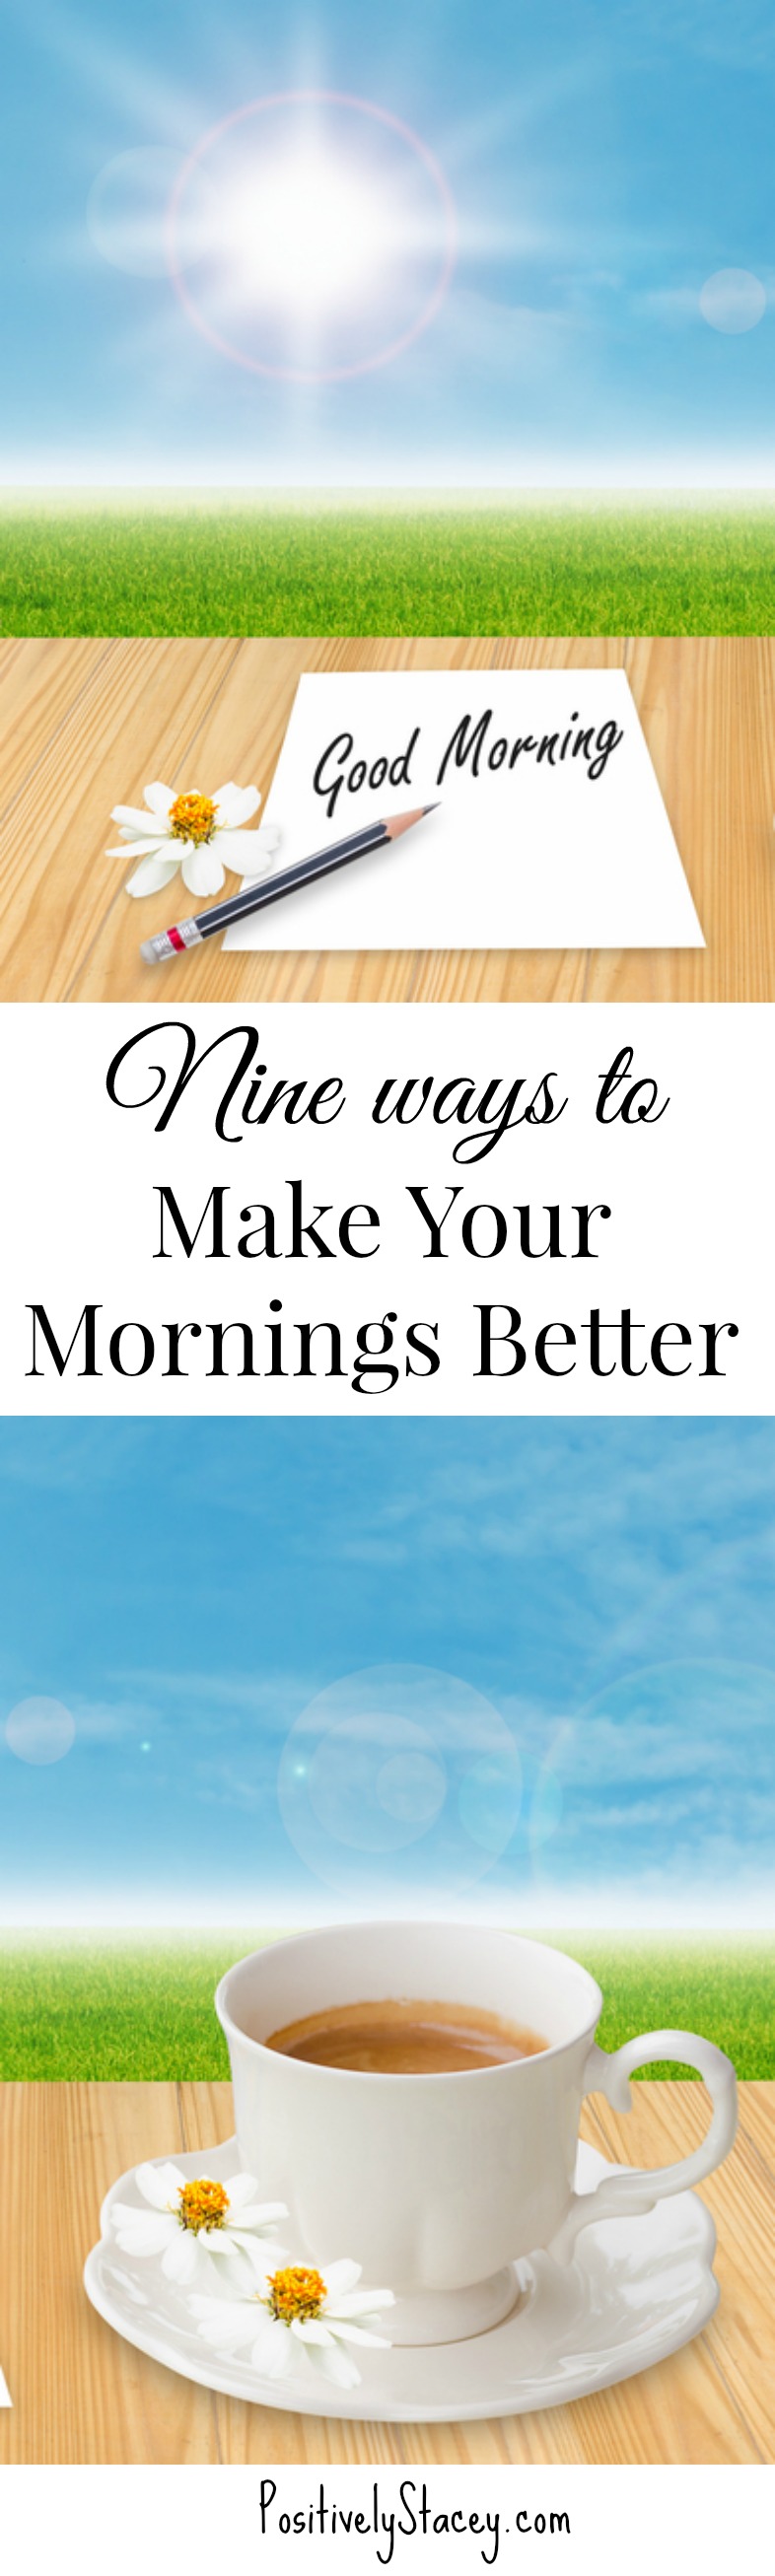 9 Ways to Make Your Mornings Better